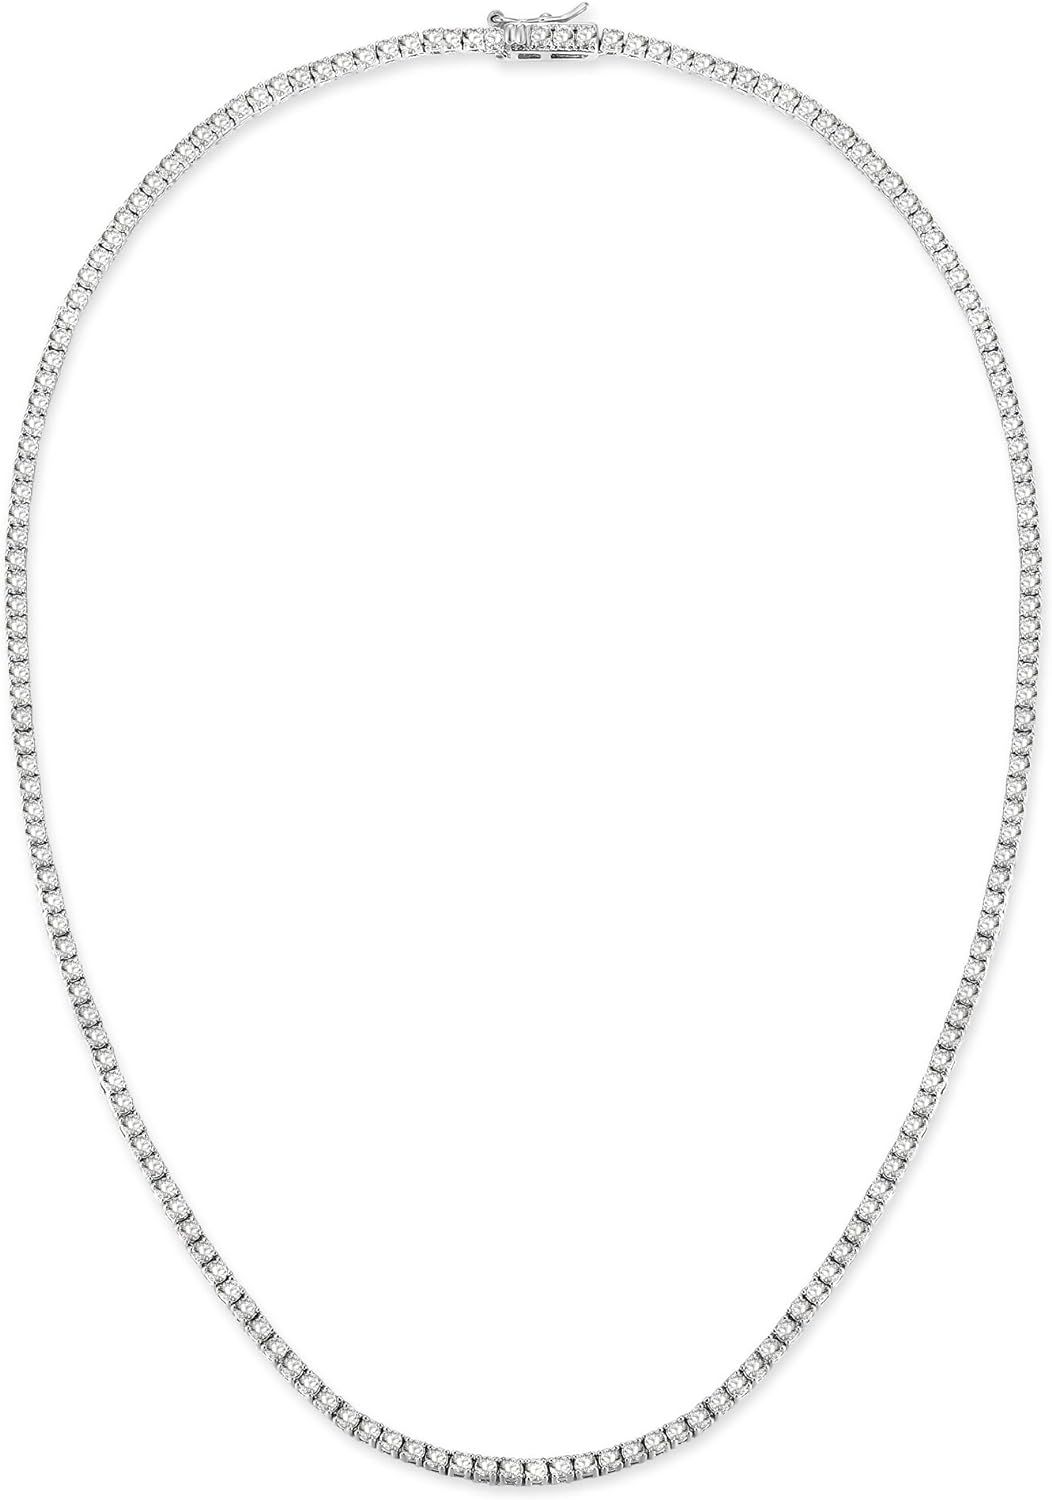 Gemsme 18K White Gold Plated 3.0mm Round Cubic Zirconia Classic Tennis Necklace for women | Amazon (US)